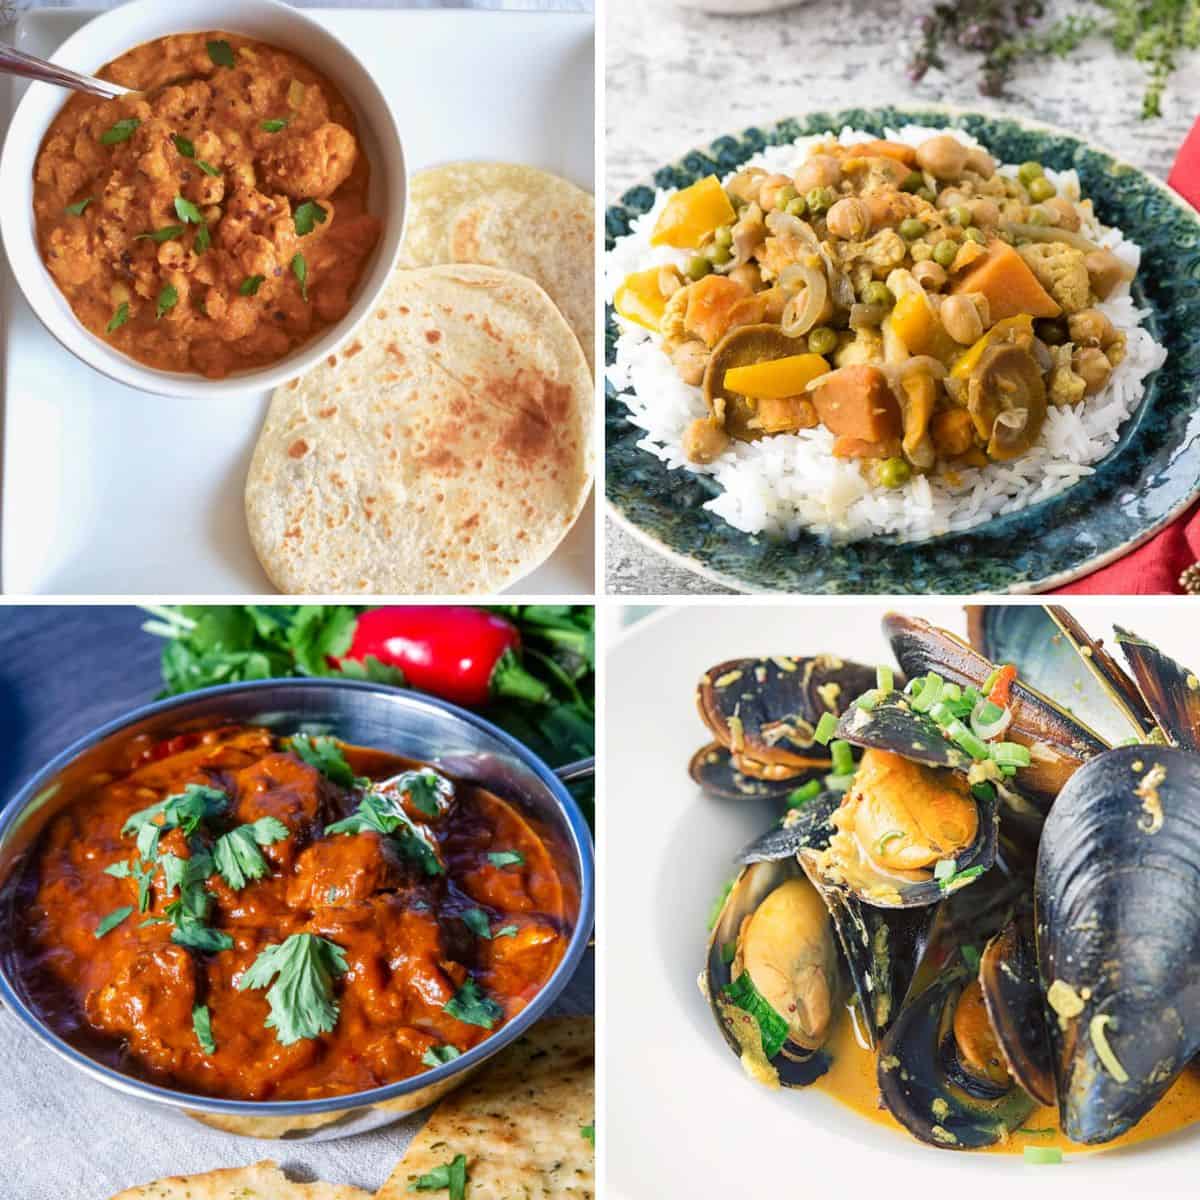 13 Delicious Indian Recipes to Spice up Family Meals